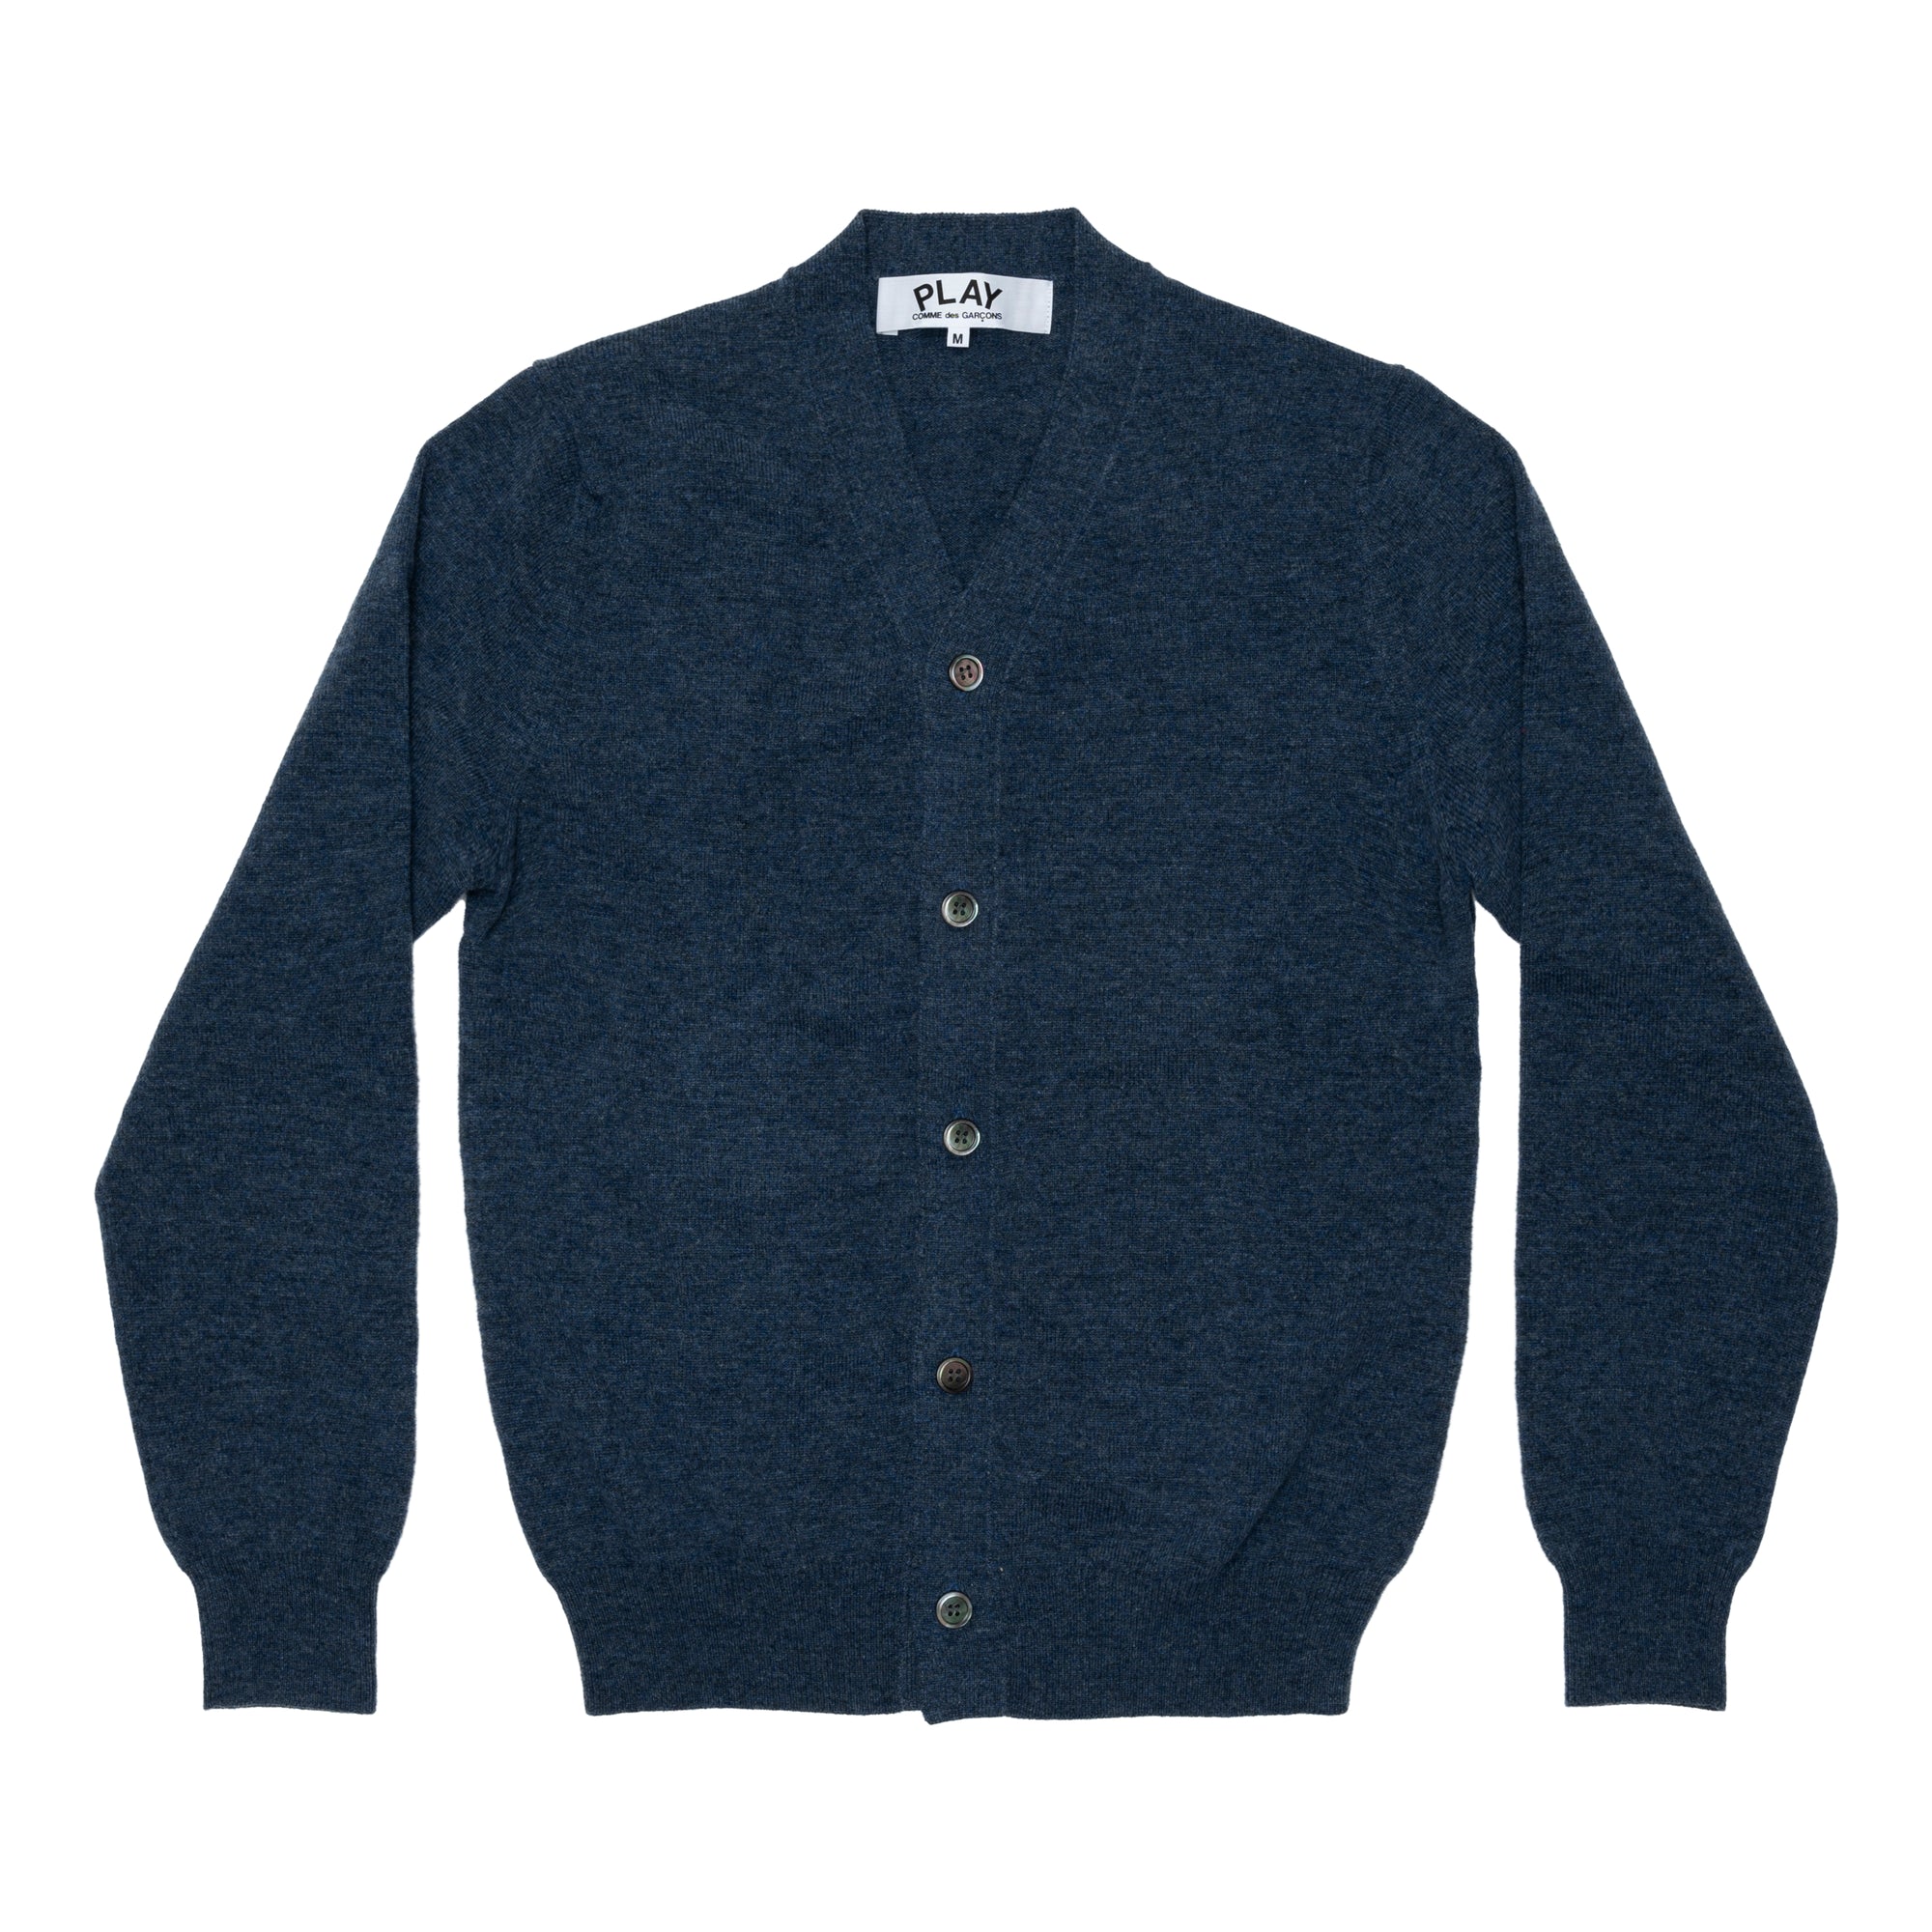 PLAY CDG  - Top Dyed Carded Lambswool Men's Cardigan - (Navy) view 1